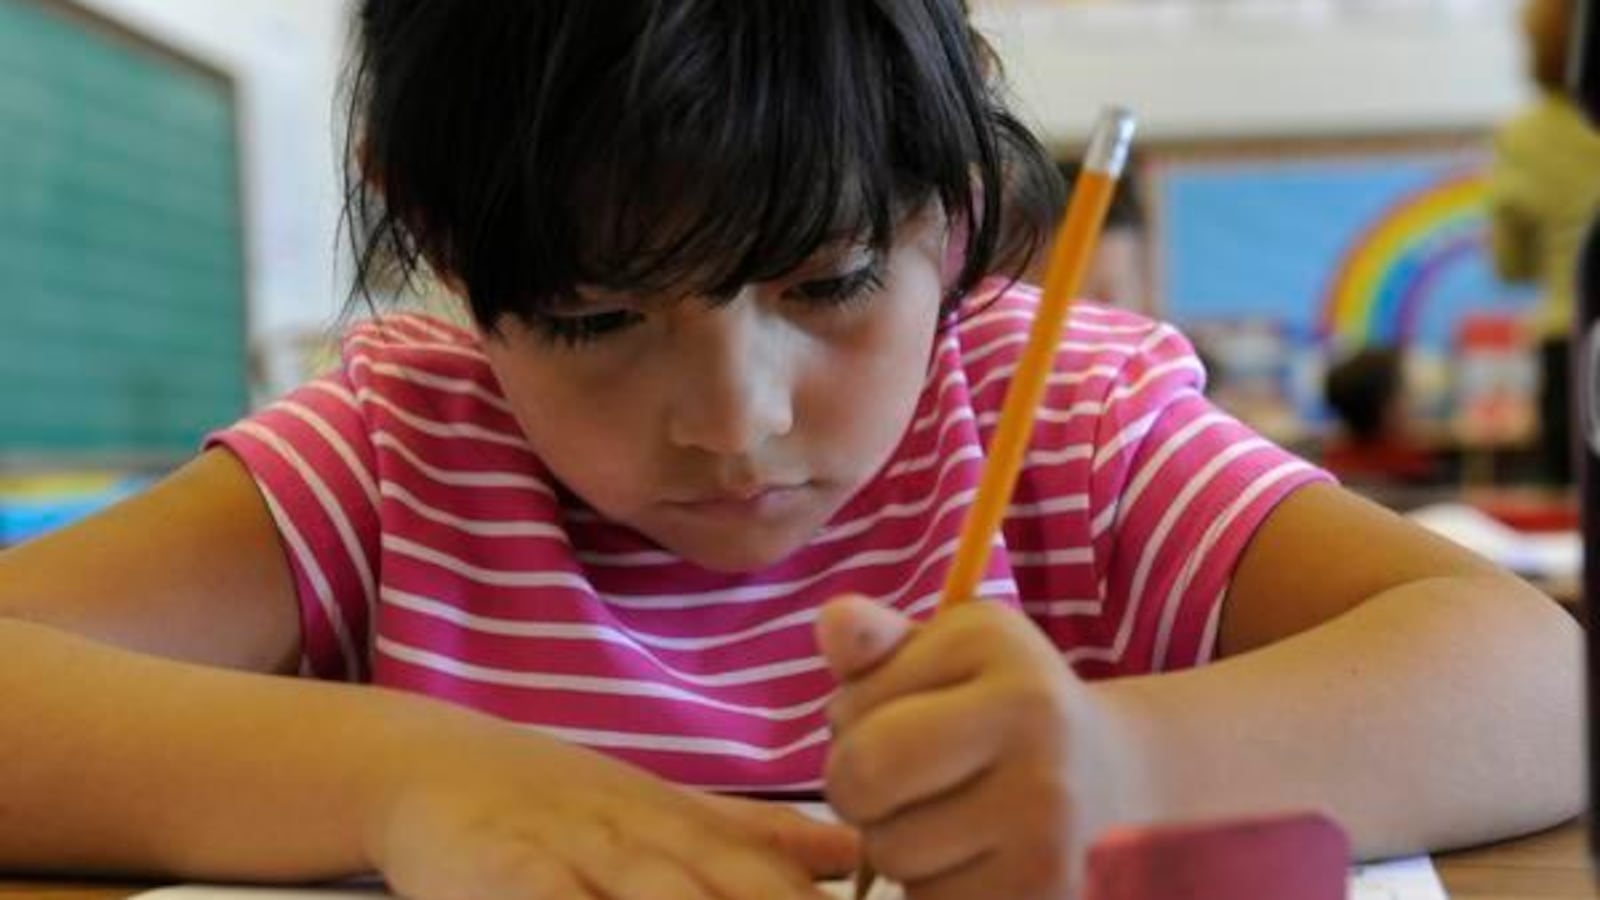 A Lincoln Elementary student practices her writing skills in this 2008 file photo.